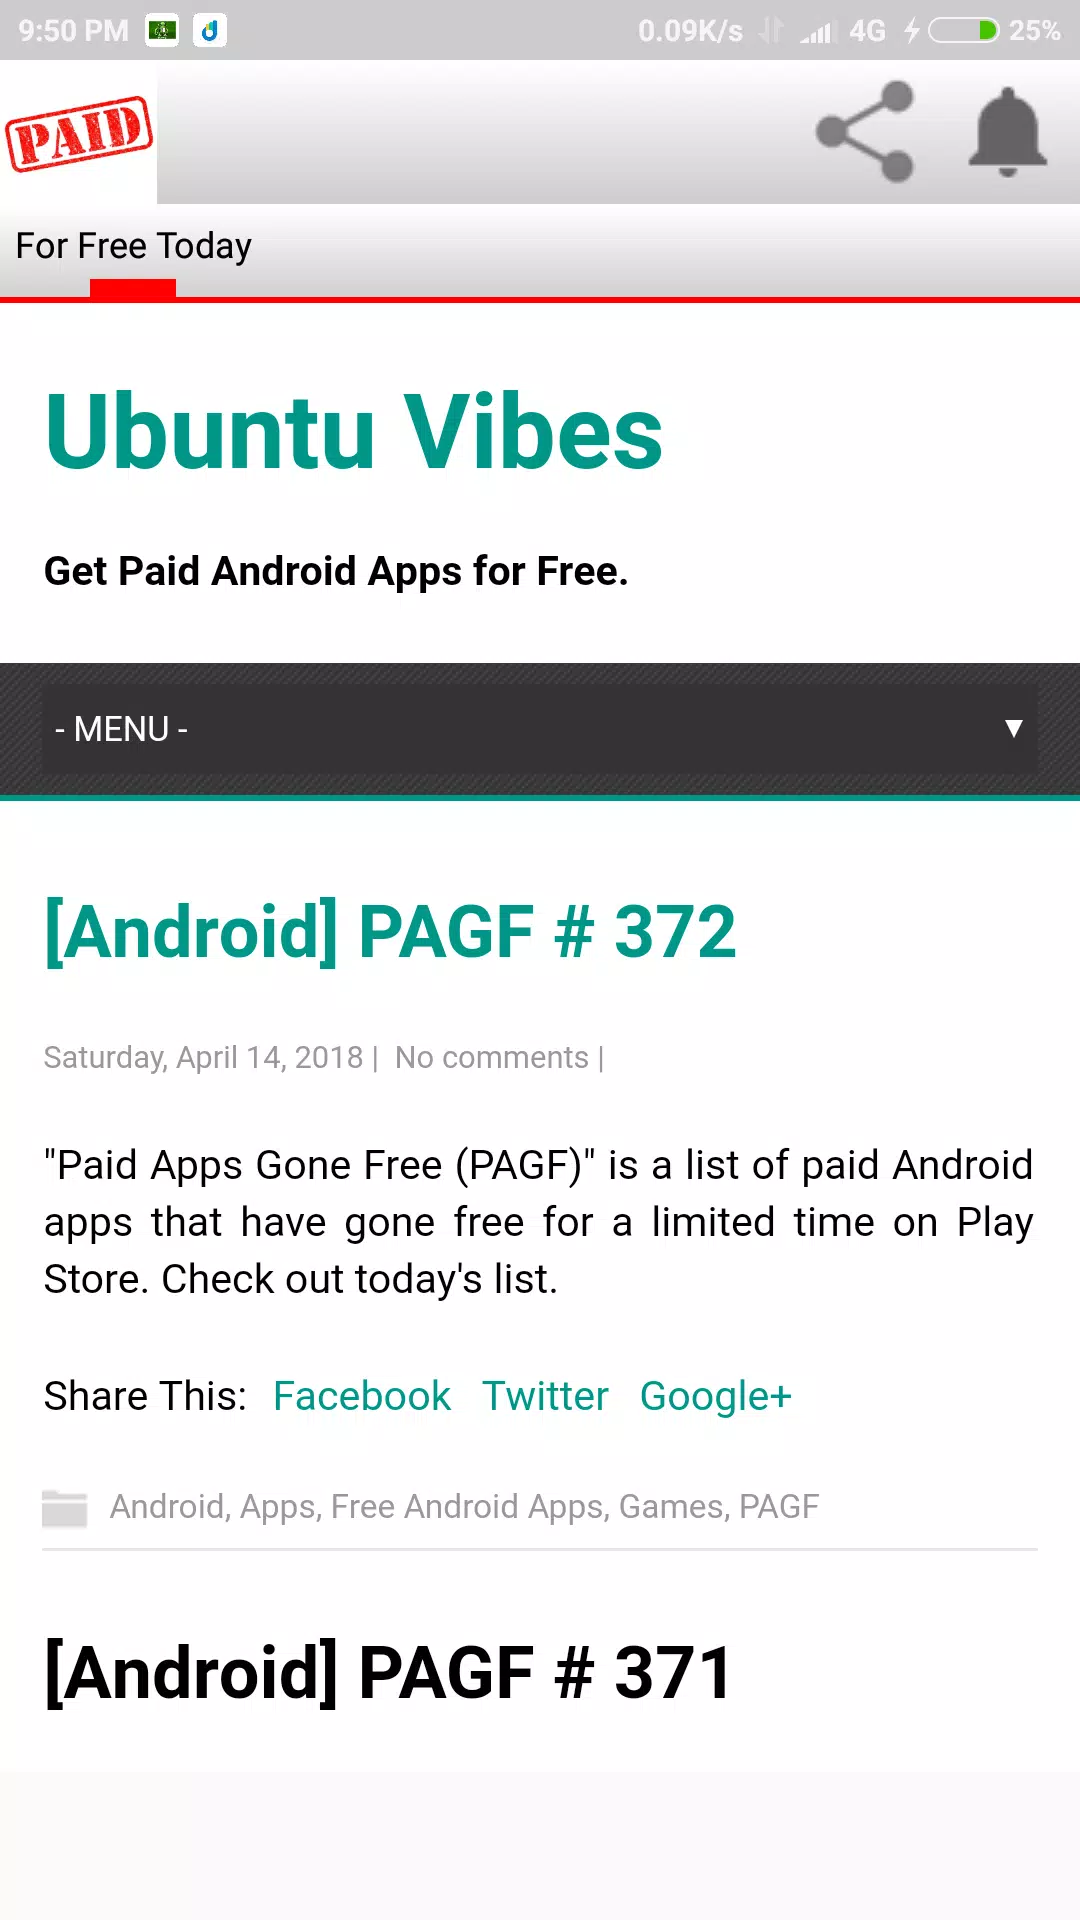 Today's List of Apps and Games That Are Free at the Play Store